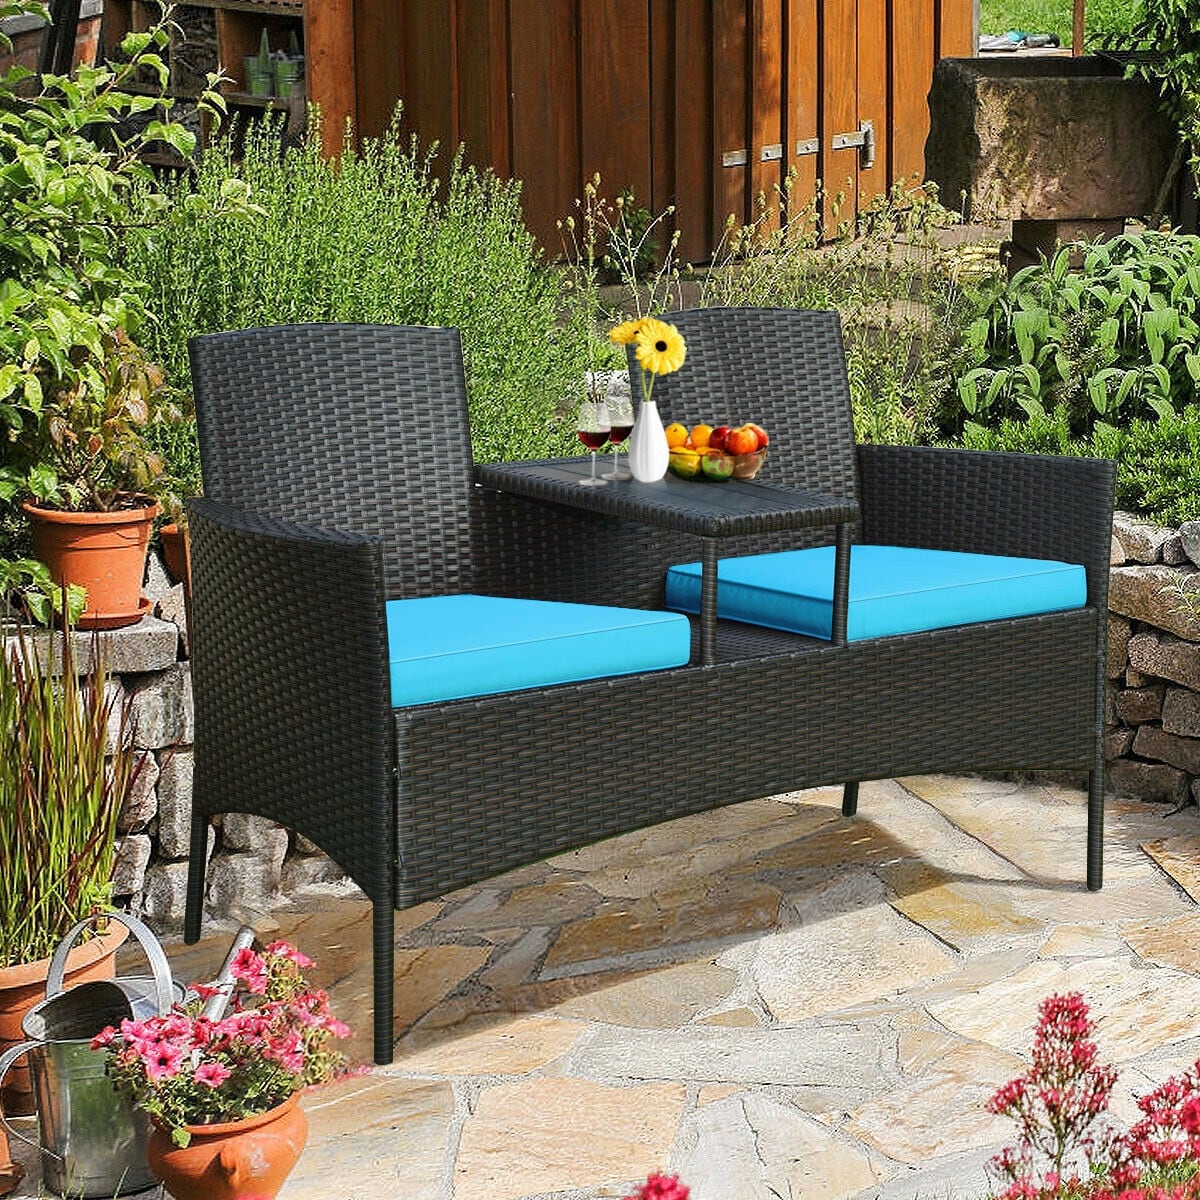 2 Seat Outdoor Patio Deck Rattan Cushioned Furniture Set Chair Tea Table Bench